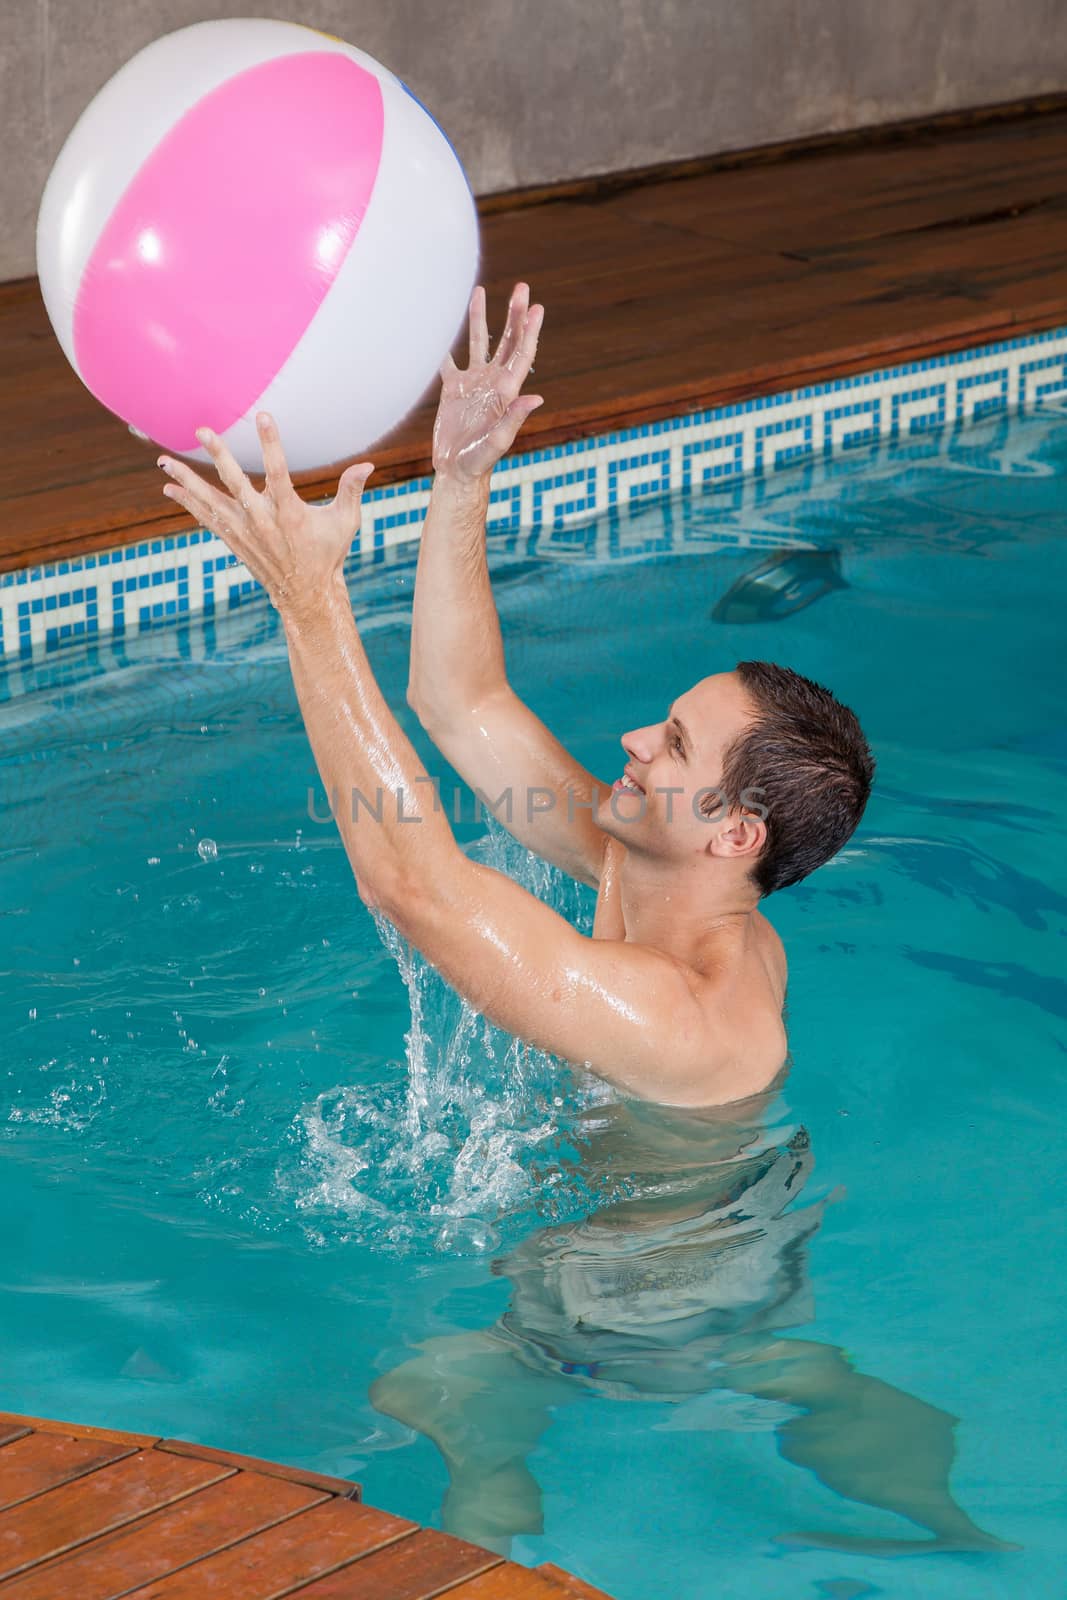 Man playing with inflatable ball inside the pool